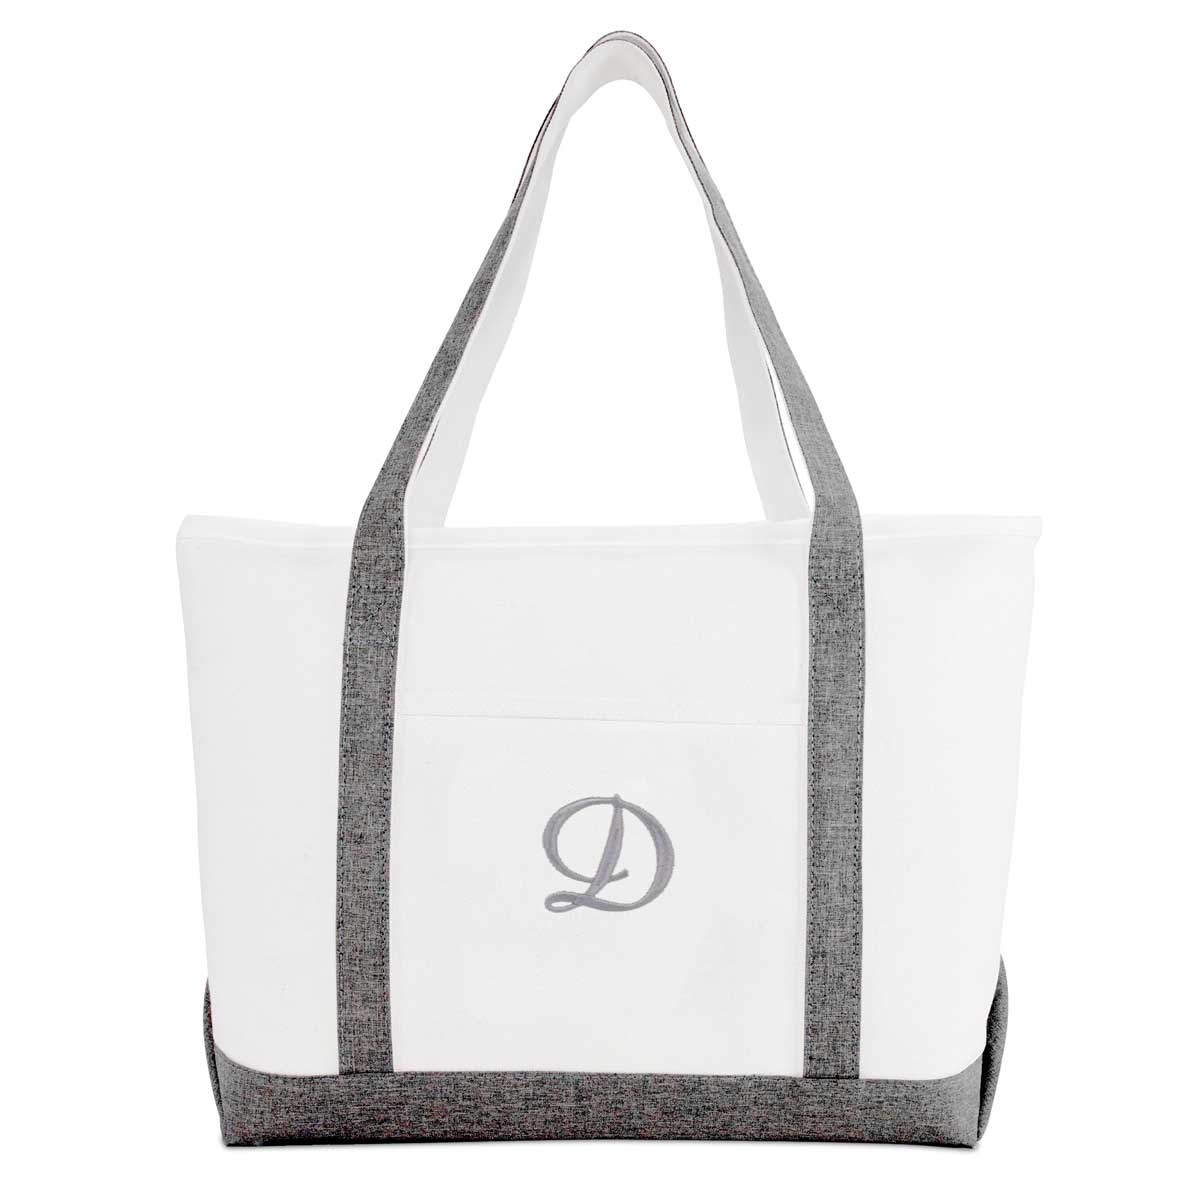 Dalix Gray Beach Tote Bag Personalized Gifts Women Shoulder Bags Letter A-Z